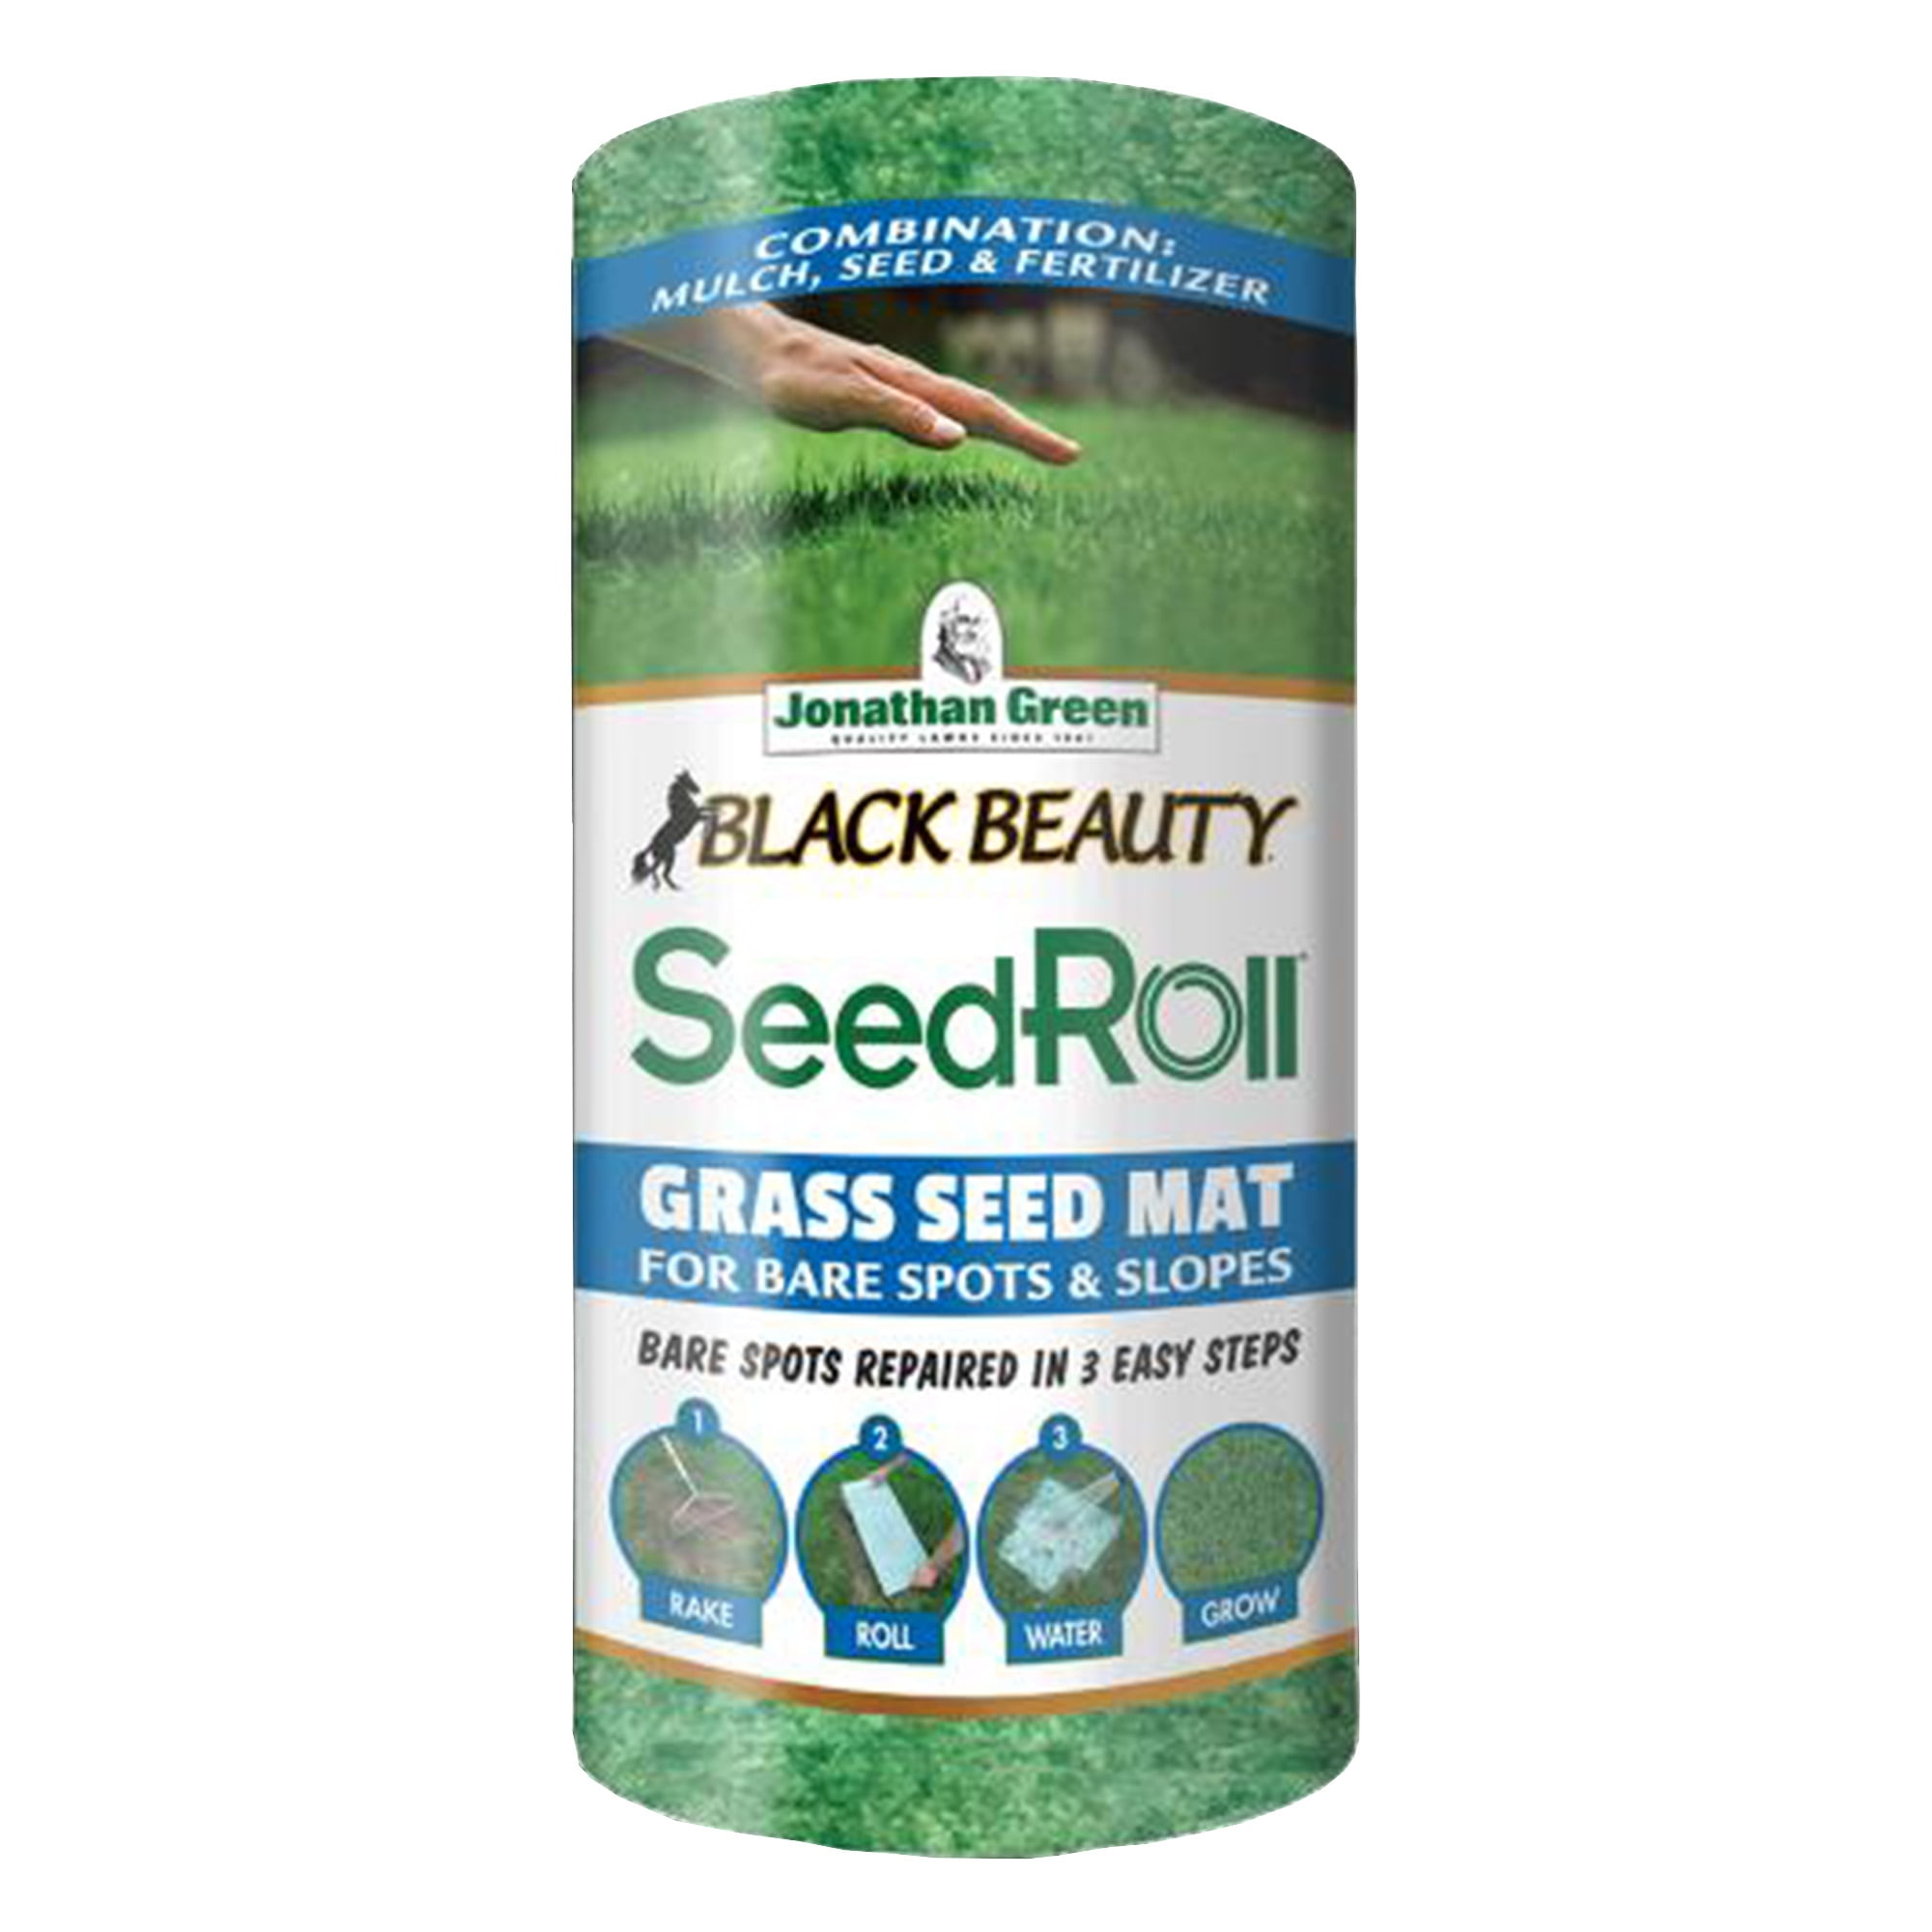 Jonathan Green 10315 Black Beauty Grass Seed Mix 25-pound for sale online 